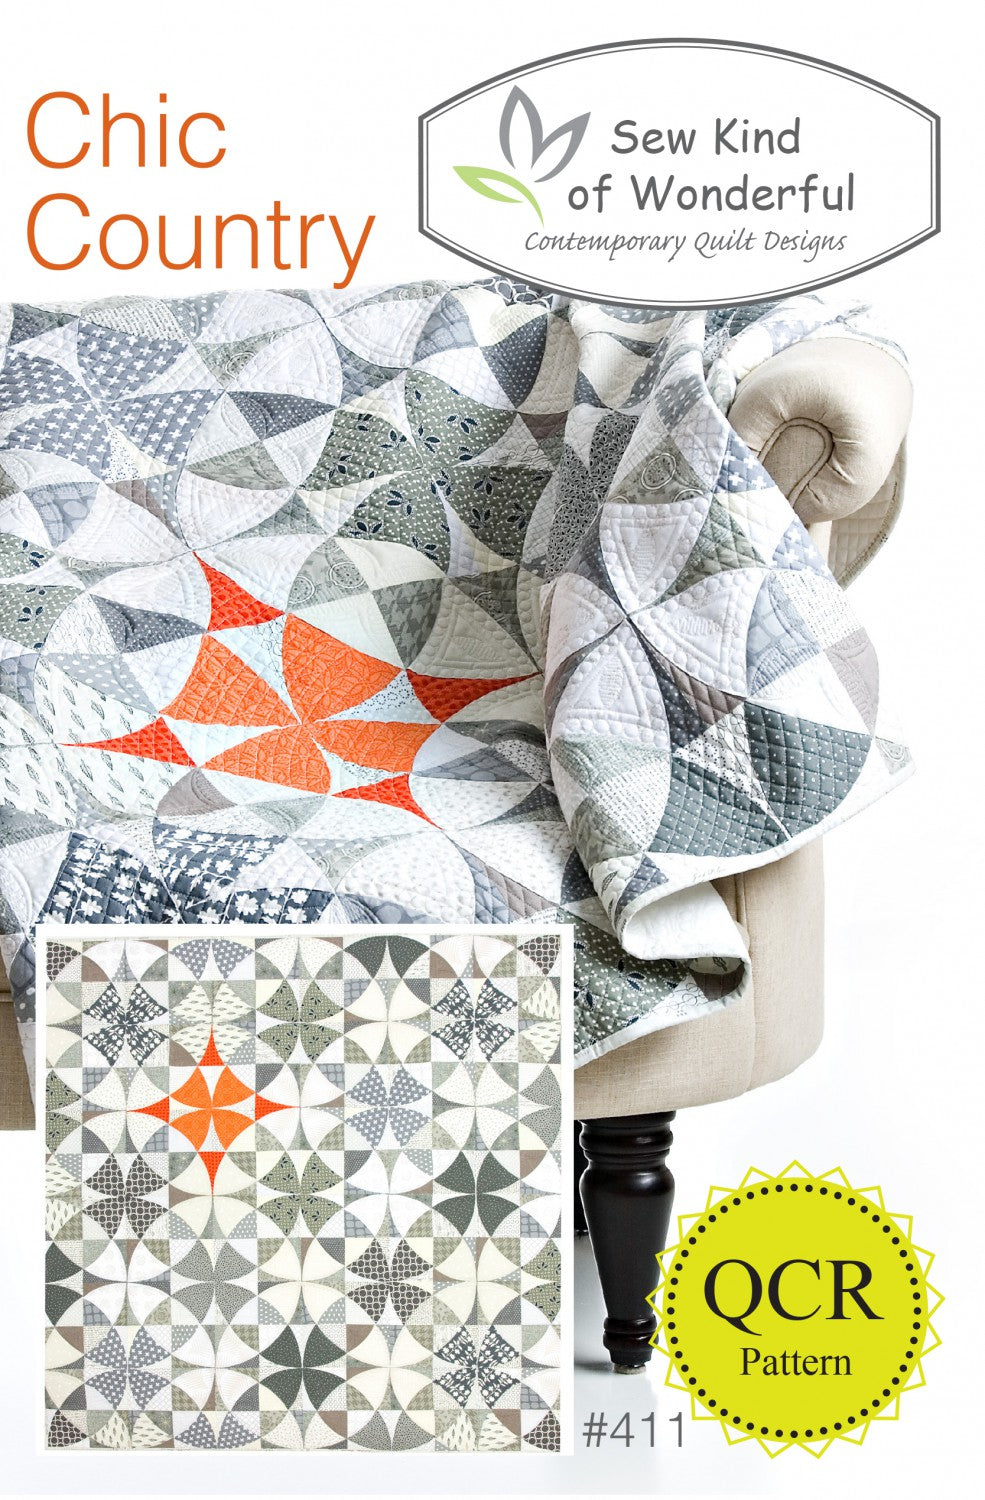 Chic Country - Quilt Pattern - Sew Kind of Wonderful